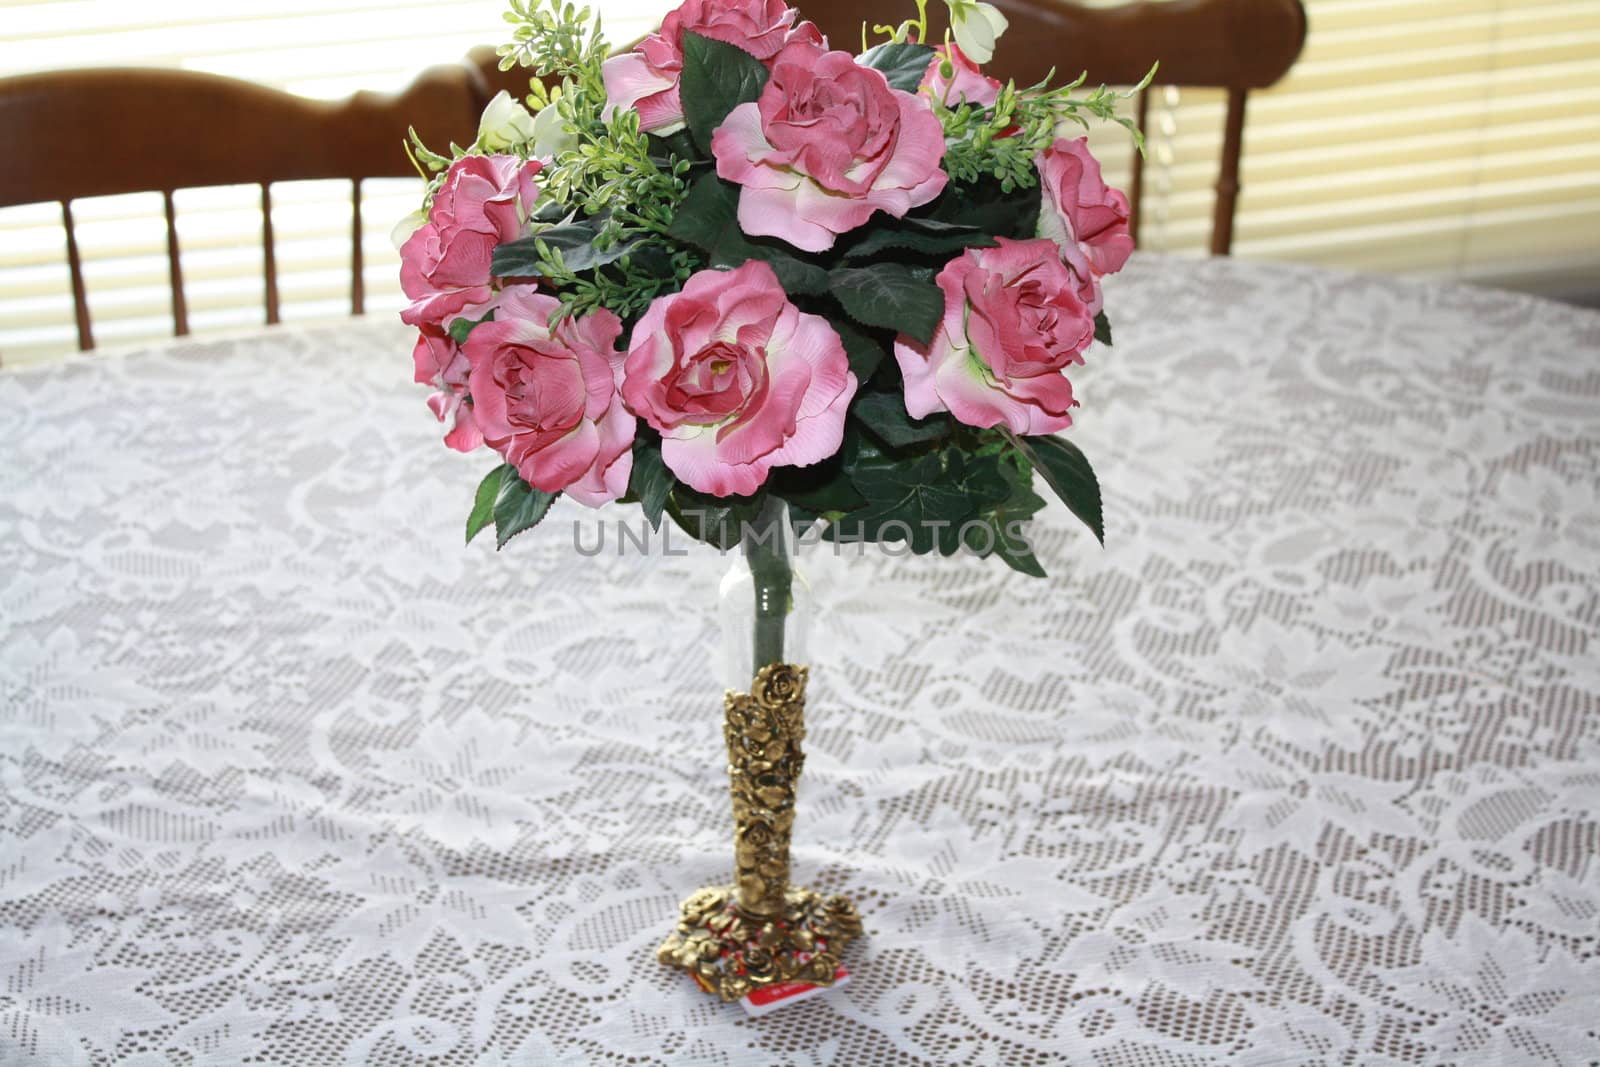 a pretty vase of flowers on a table